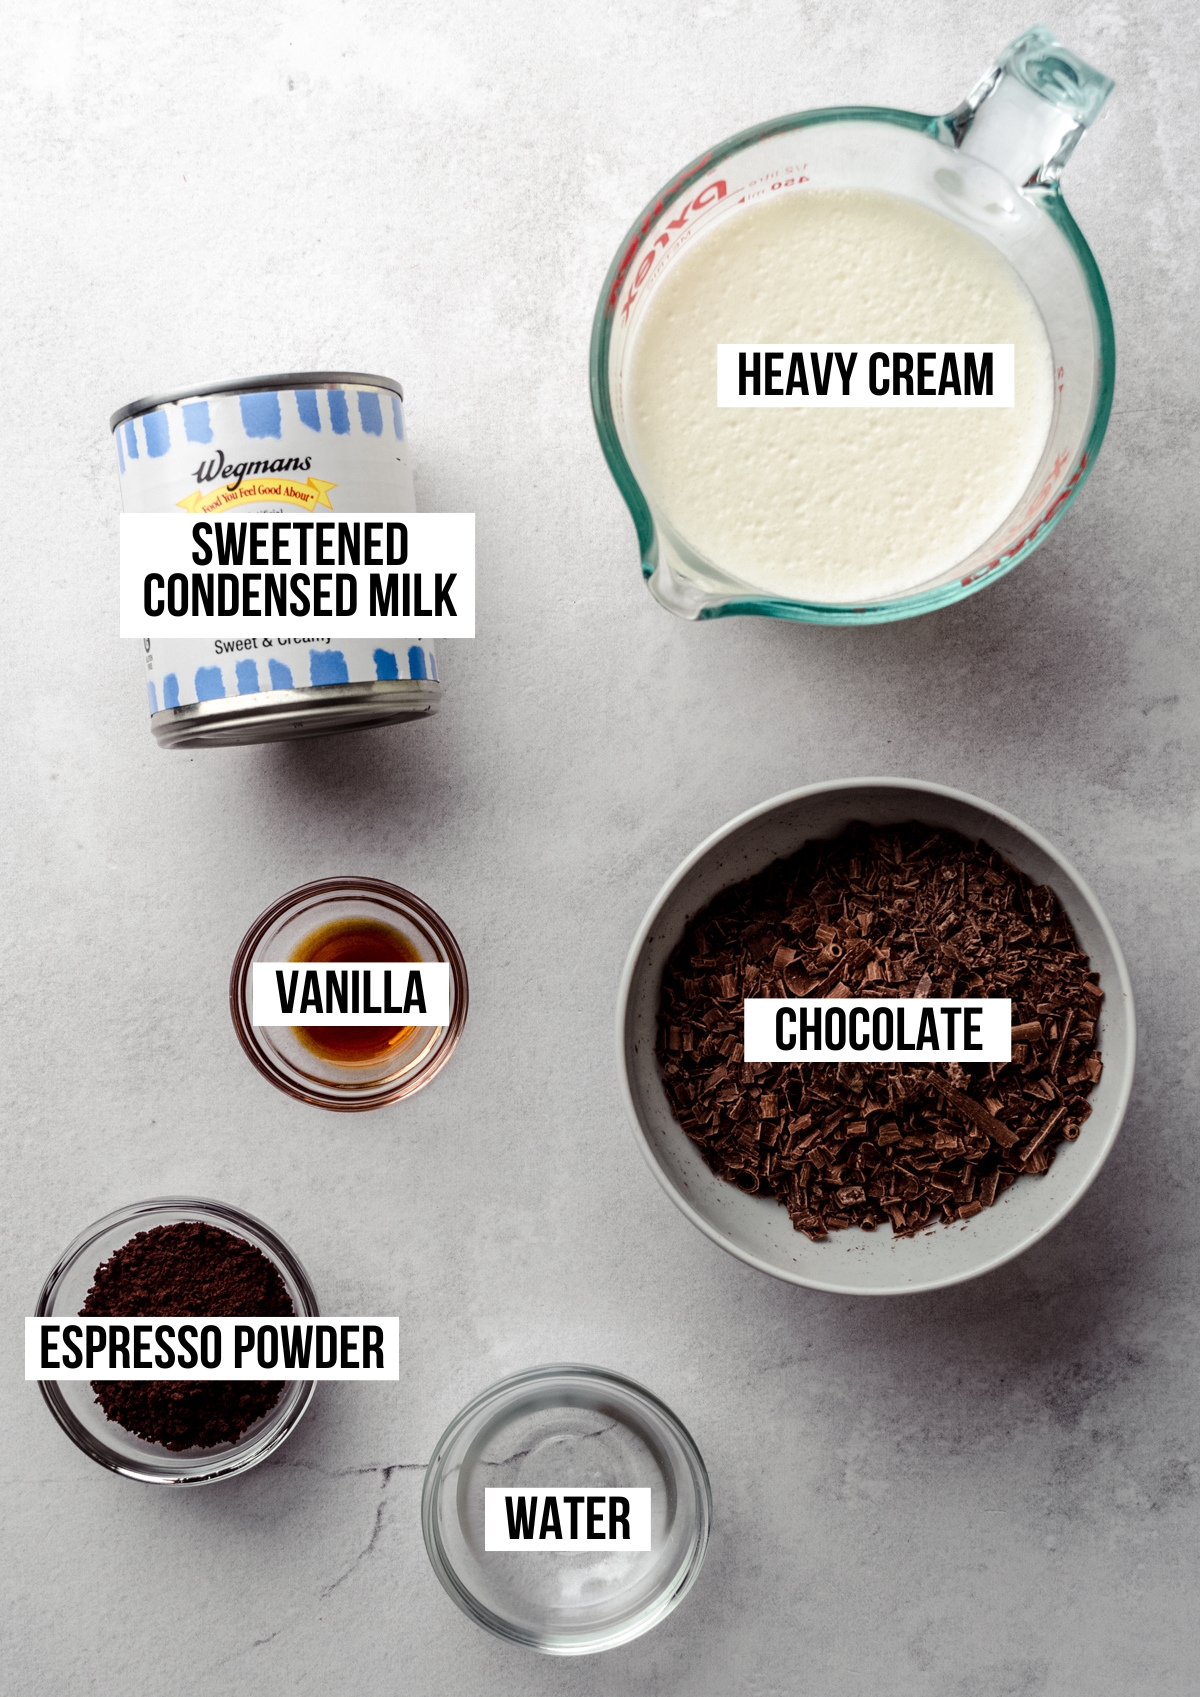 Aerial photo of ingredients to make no churn coffee ice cream with text overlay labeling each ingredient.